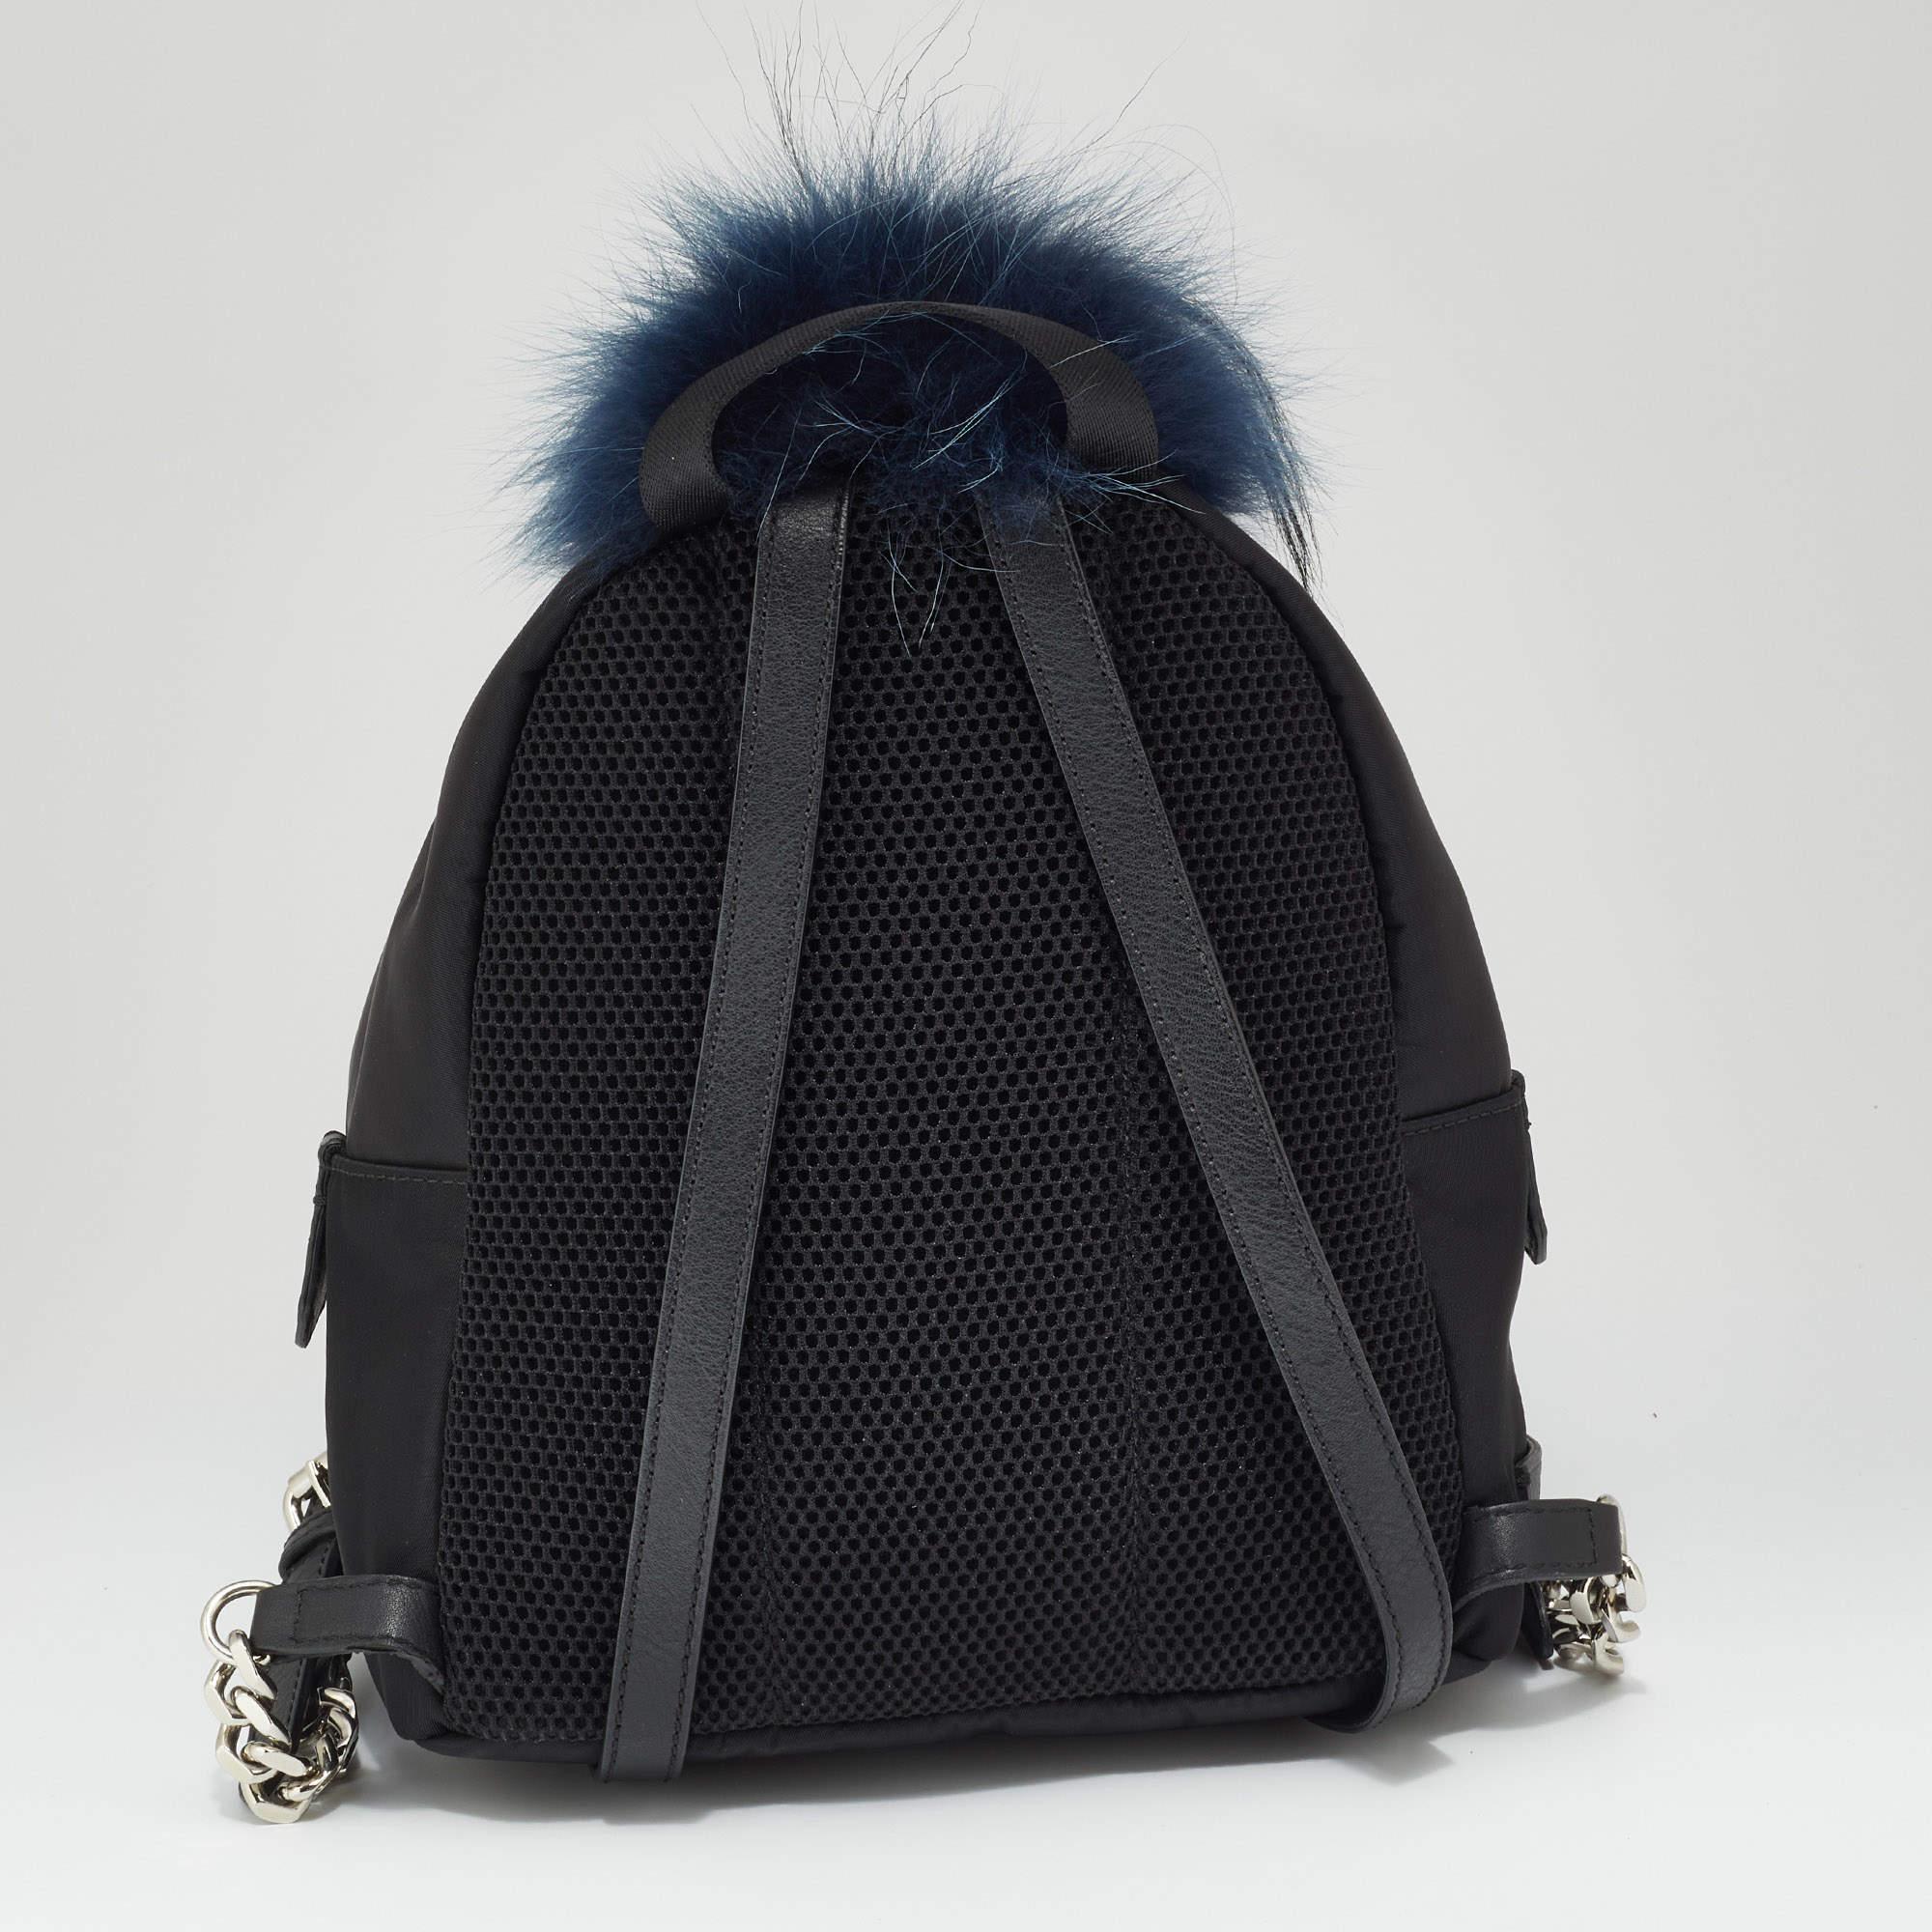 Fendi provides a fun alternative to your everyday bag. It is made of black nylon and leather. The backpack has zip compartments and stud details for a chic look.

